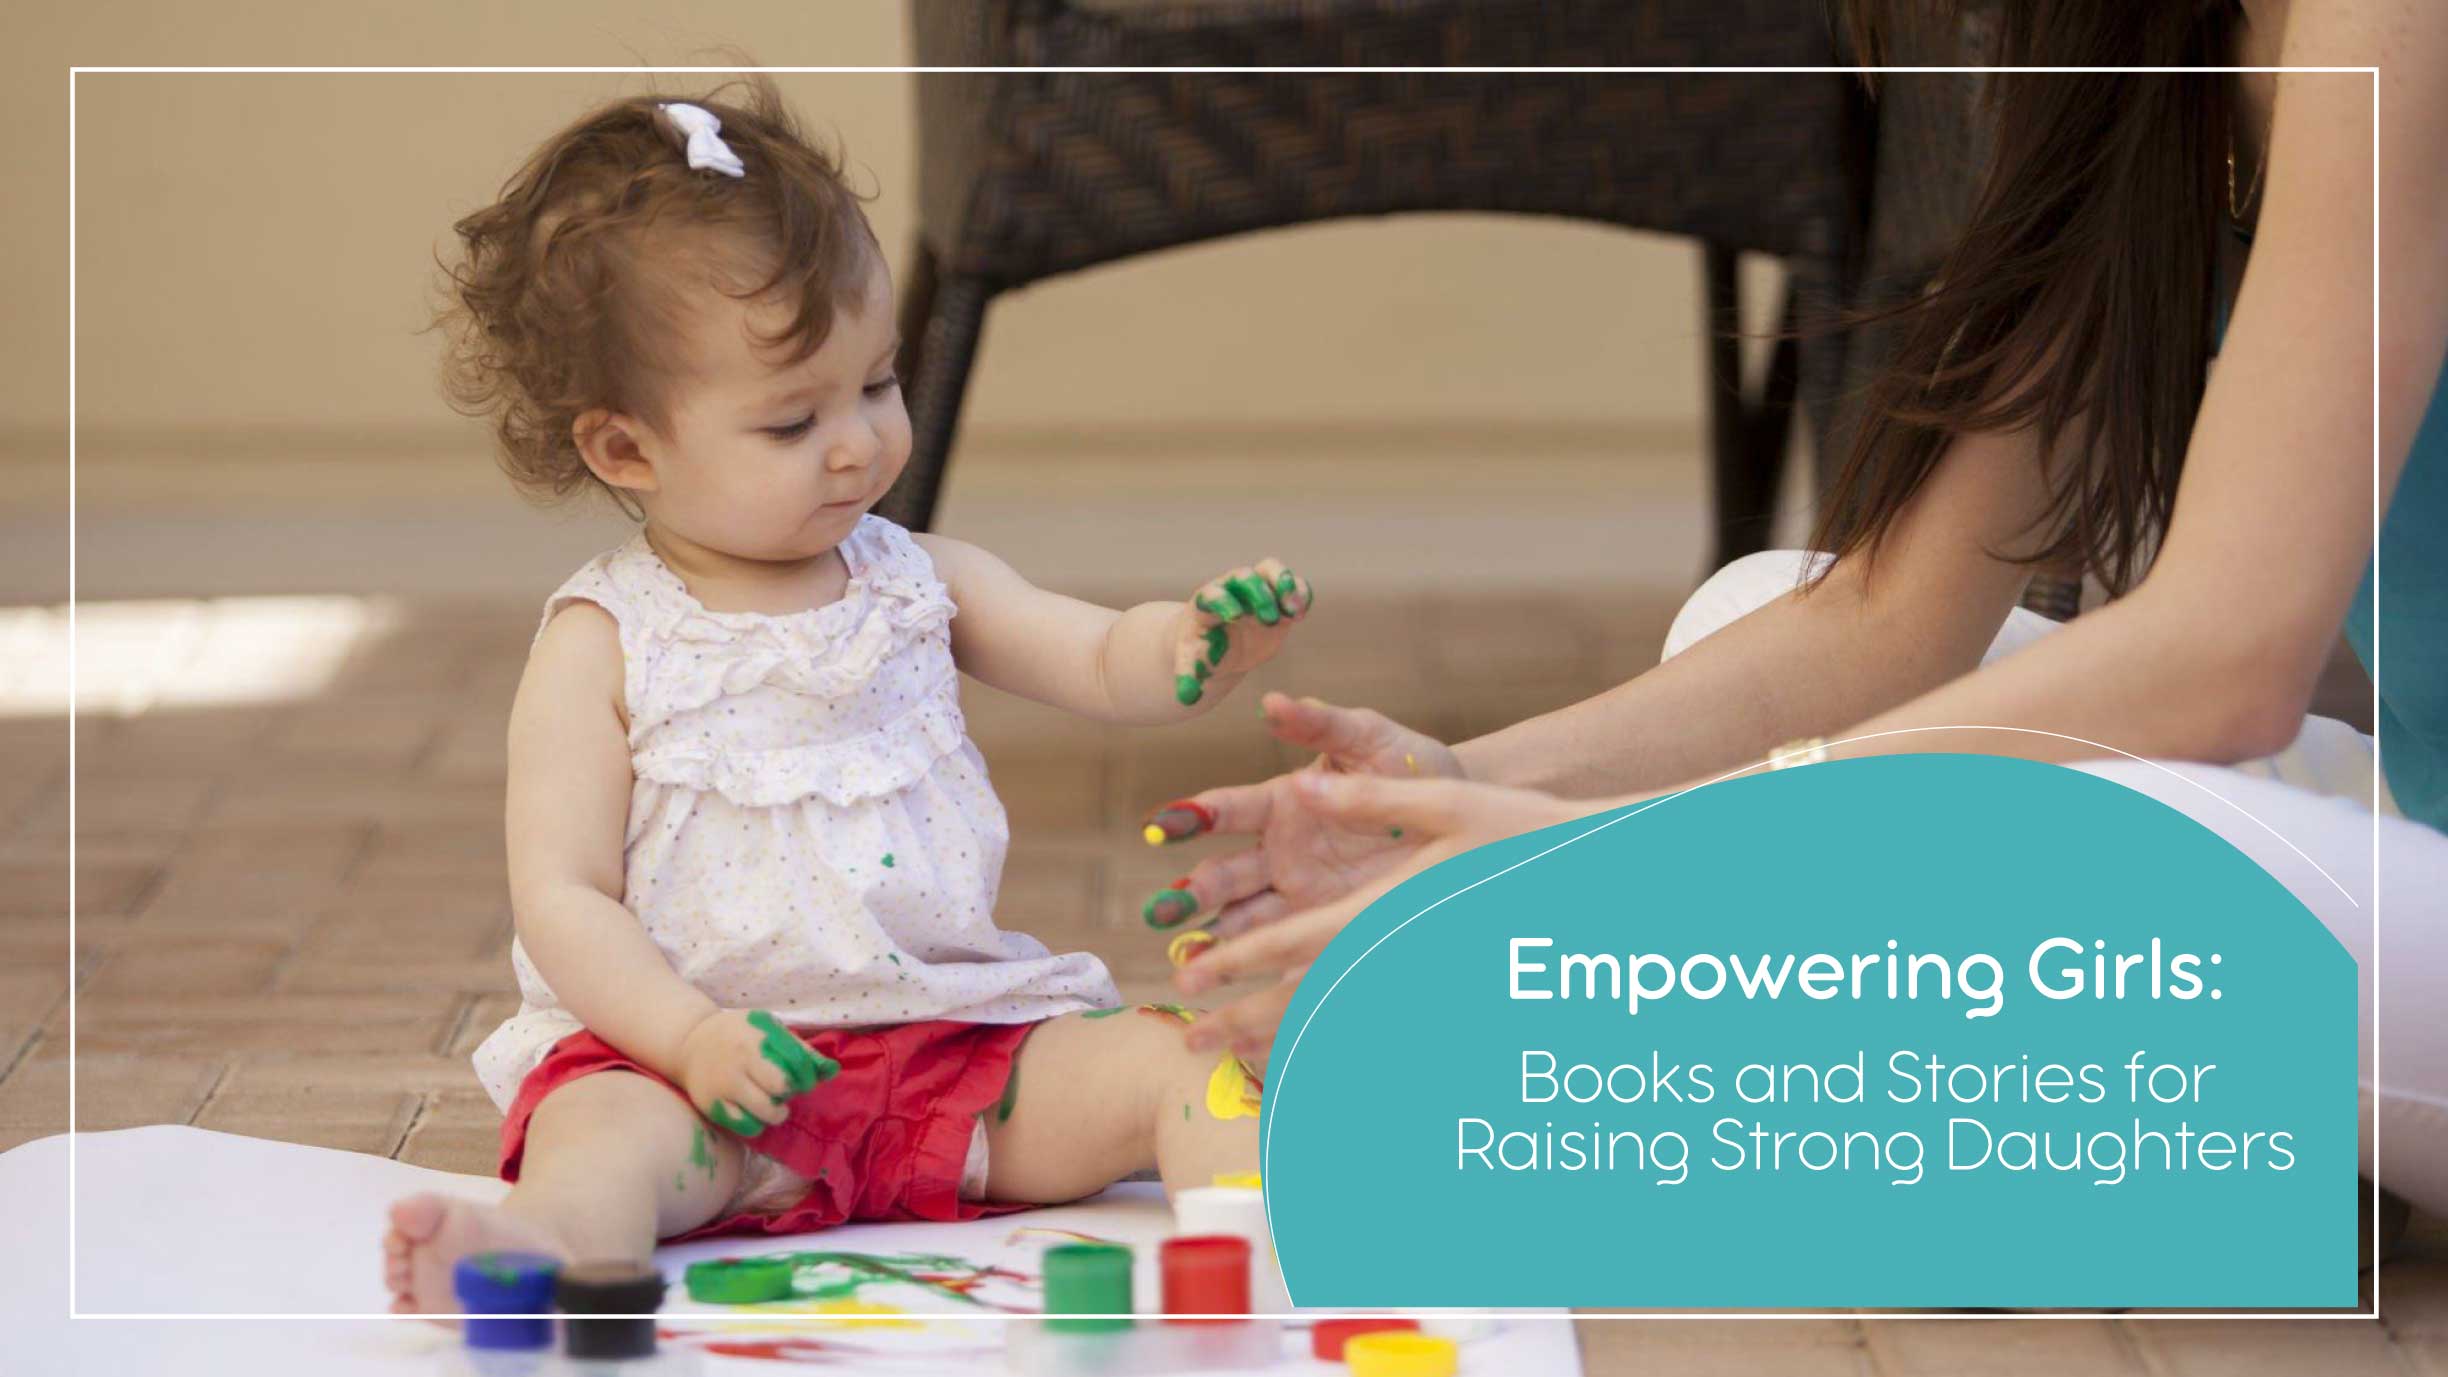 Empowering Girls: Books and Stories for Raising Strong Daughters